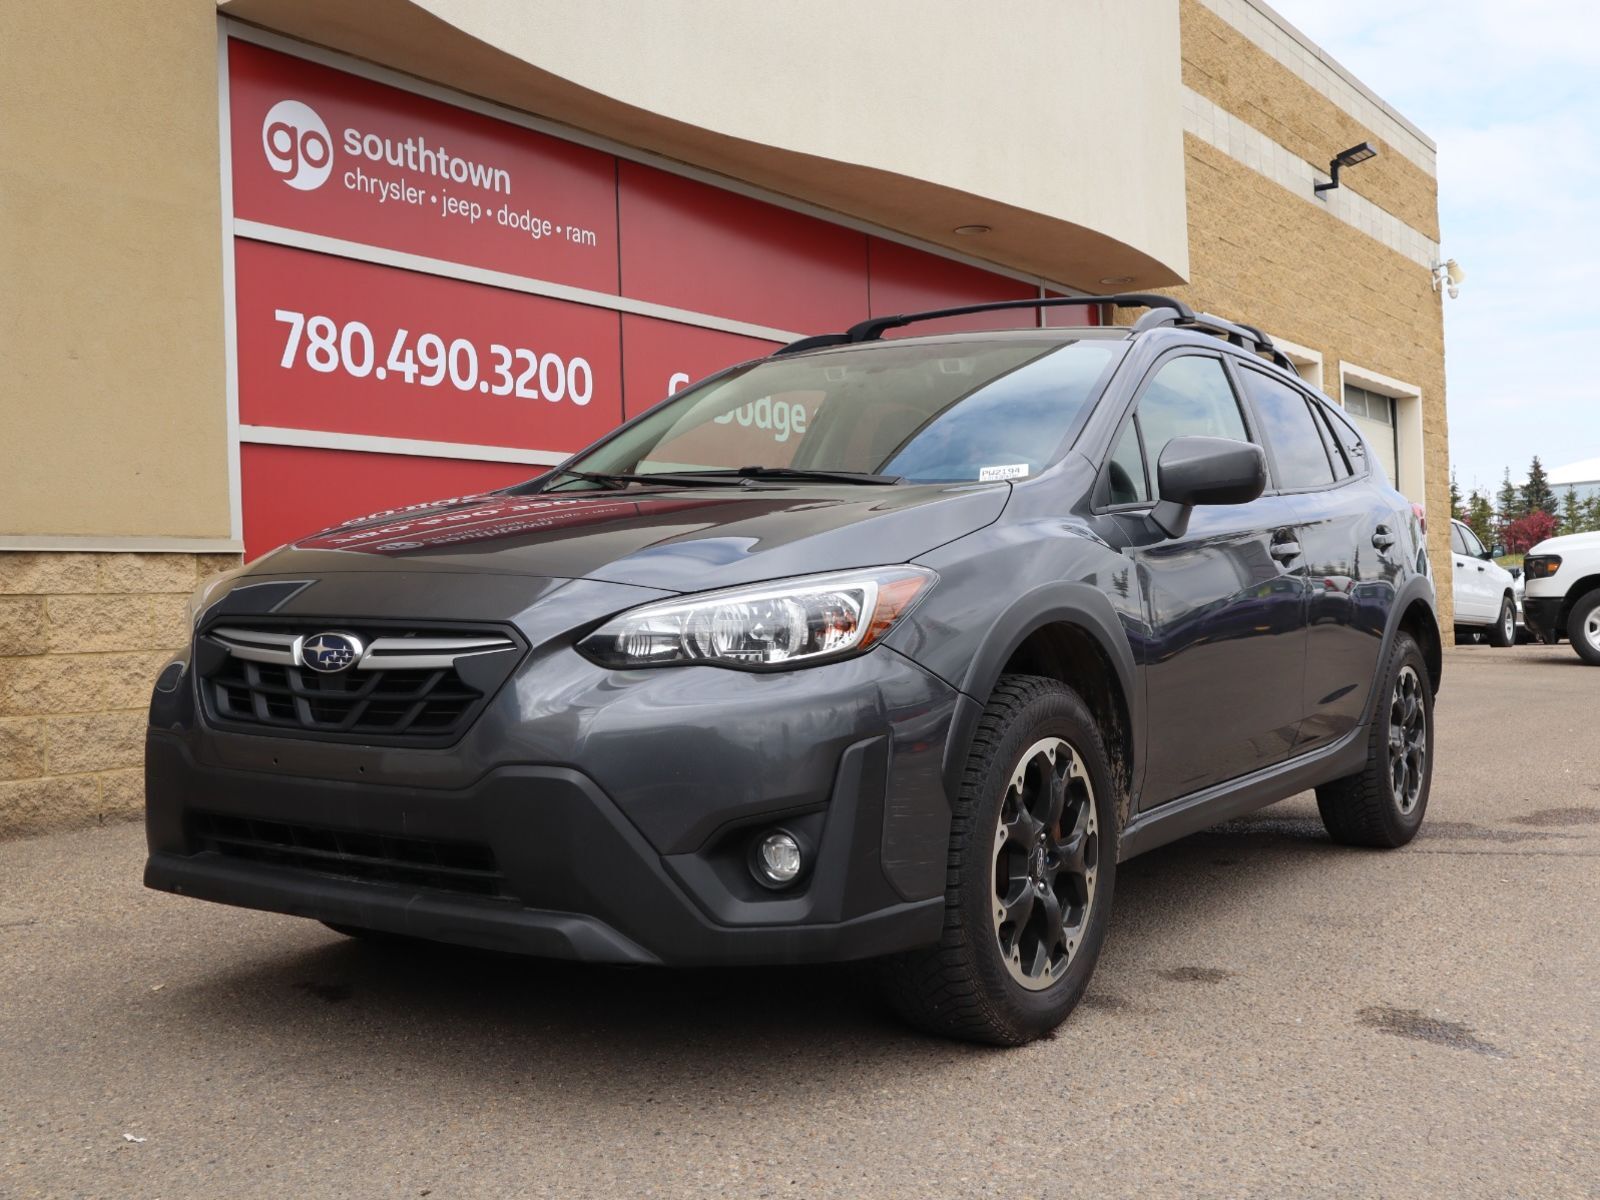 2021 Subaru Crosstrek TOURING IN GREY EQUIPPED WITH A 182HP 2.0L H4 BOXE